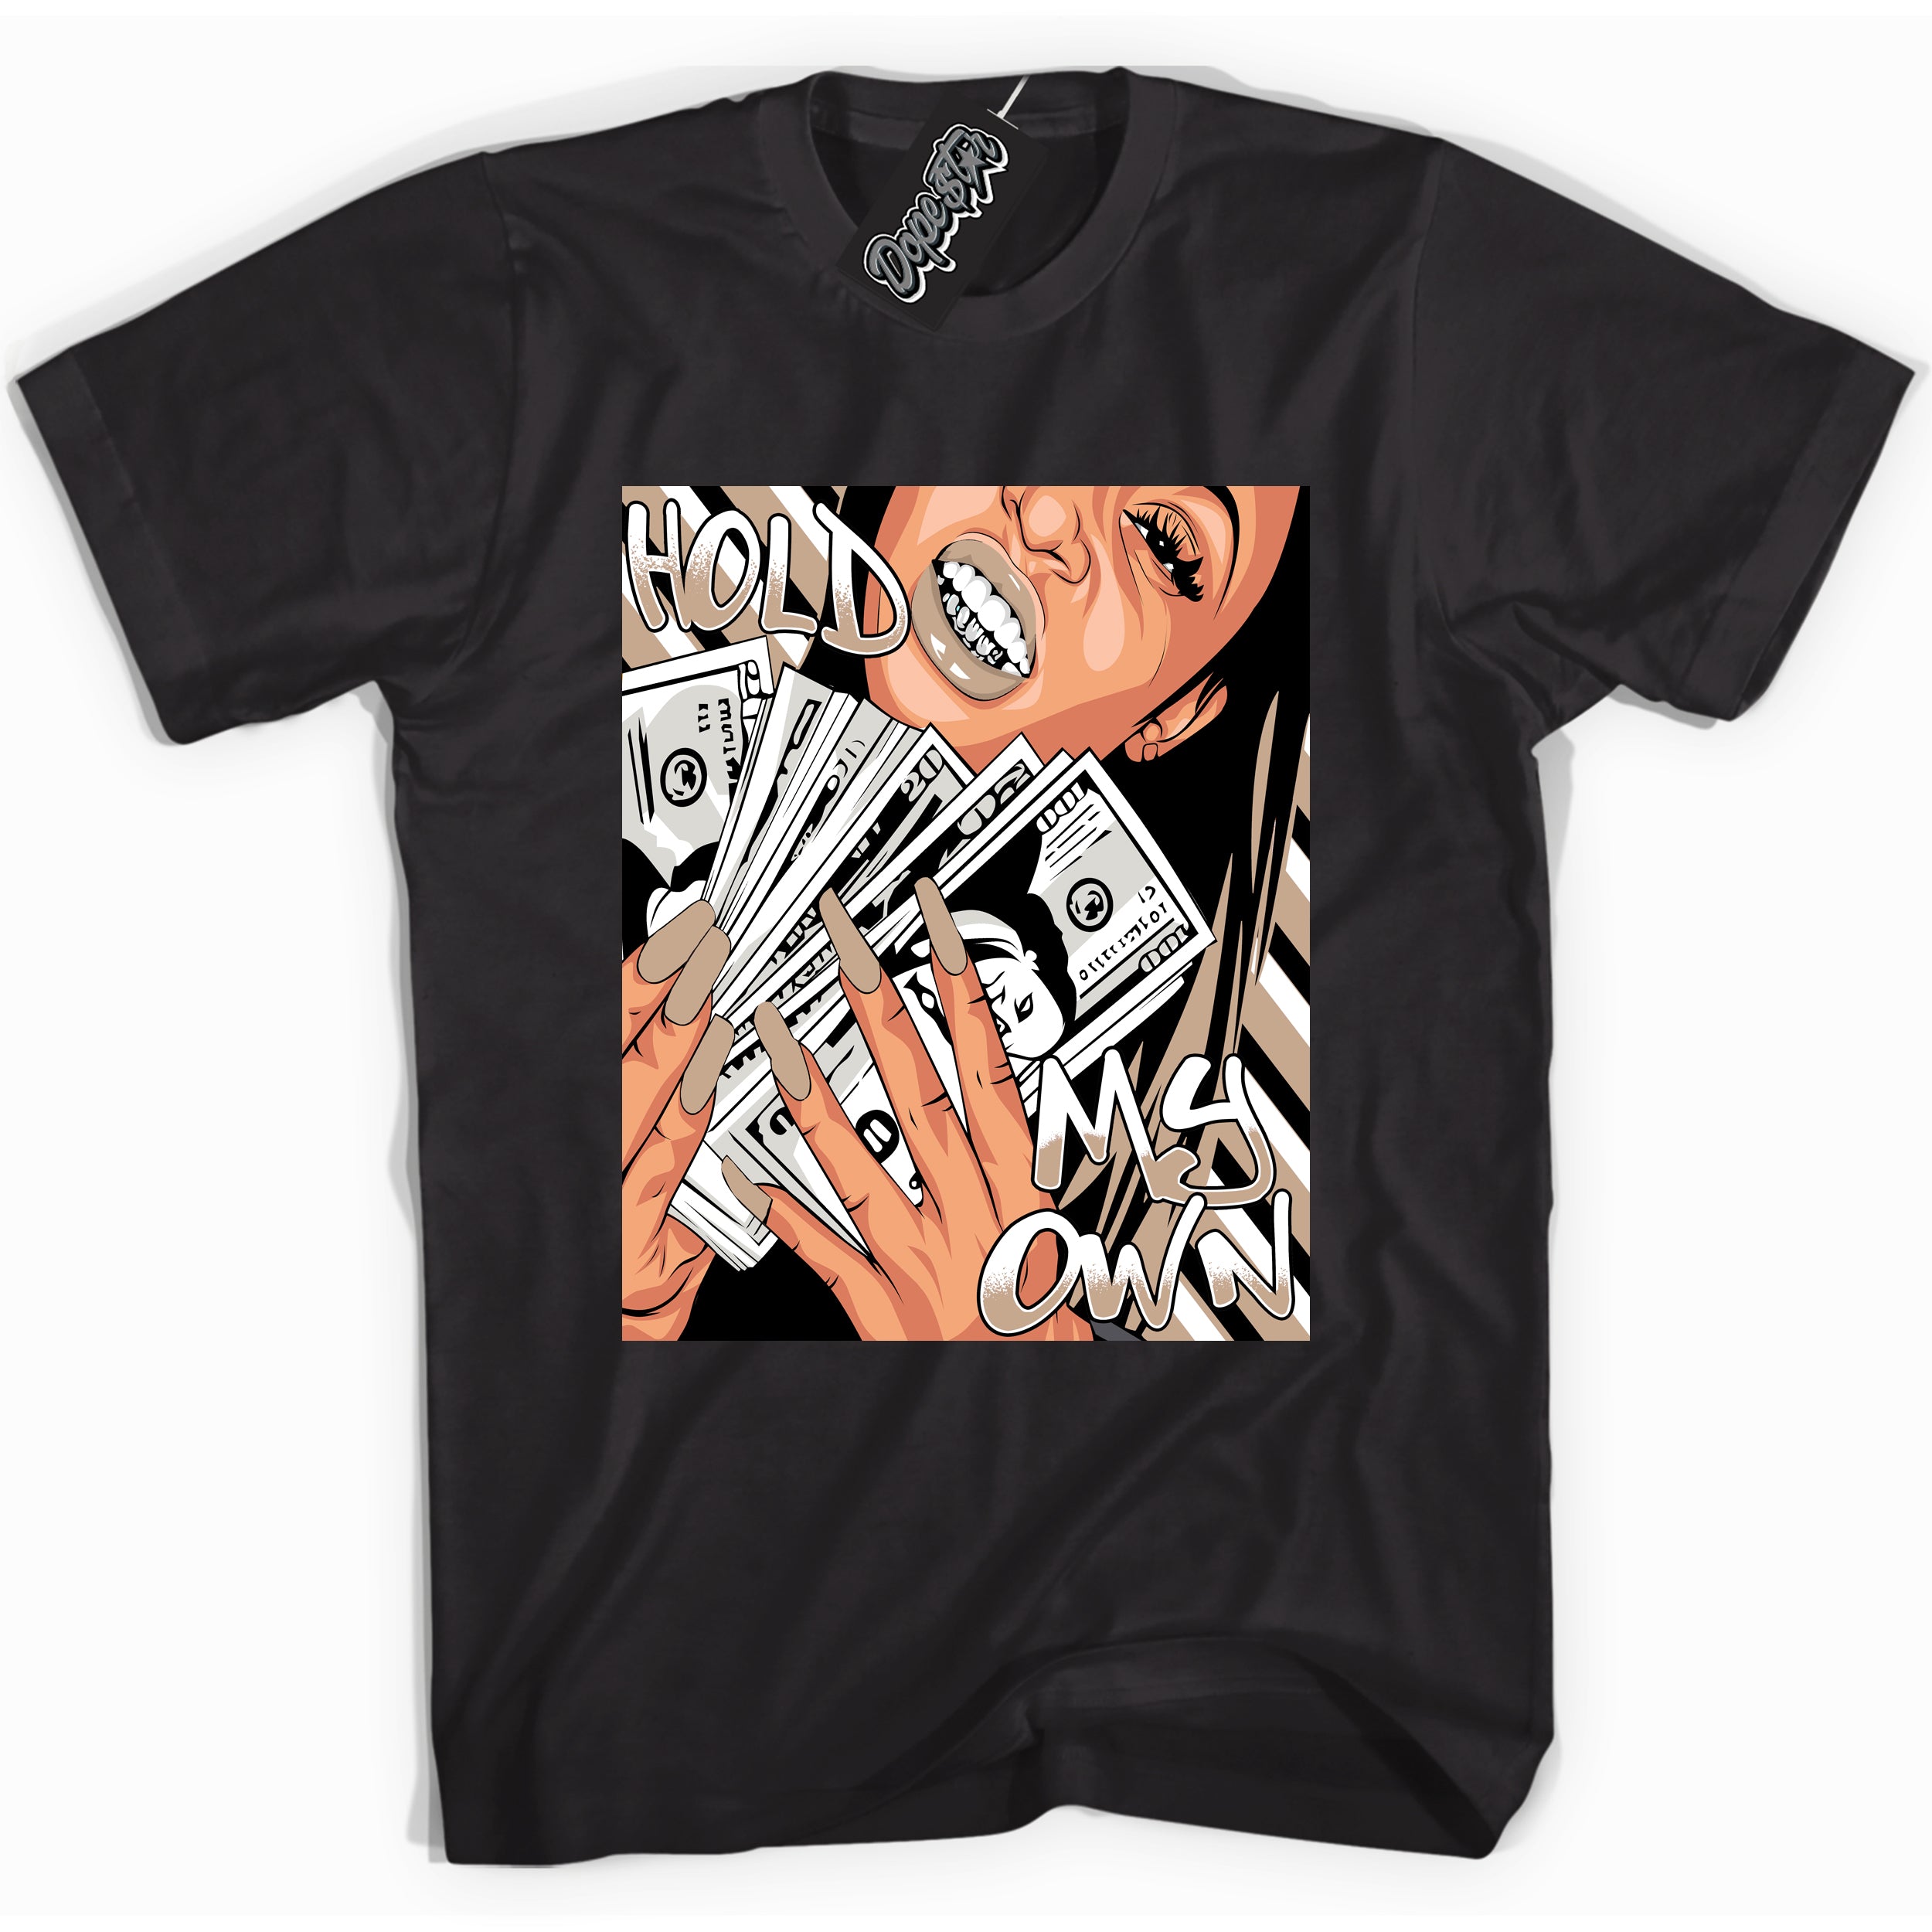 Cool Black graphic tee with “ Hold My Own ” design, that perfectly matches Palomino 1s sneakers 